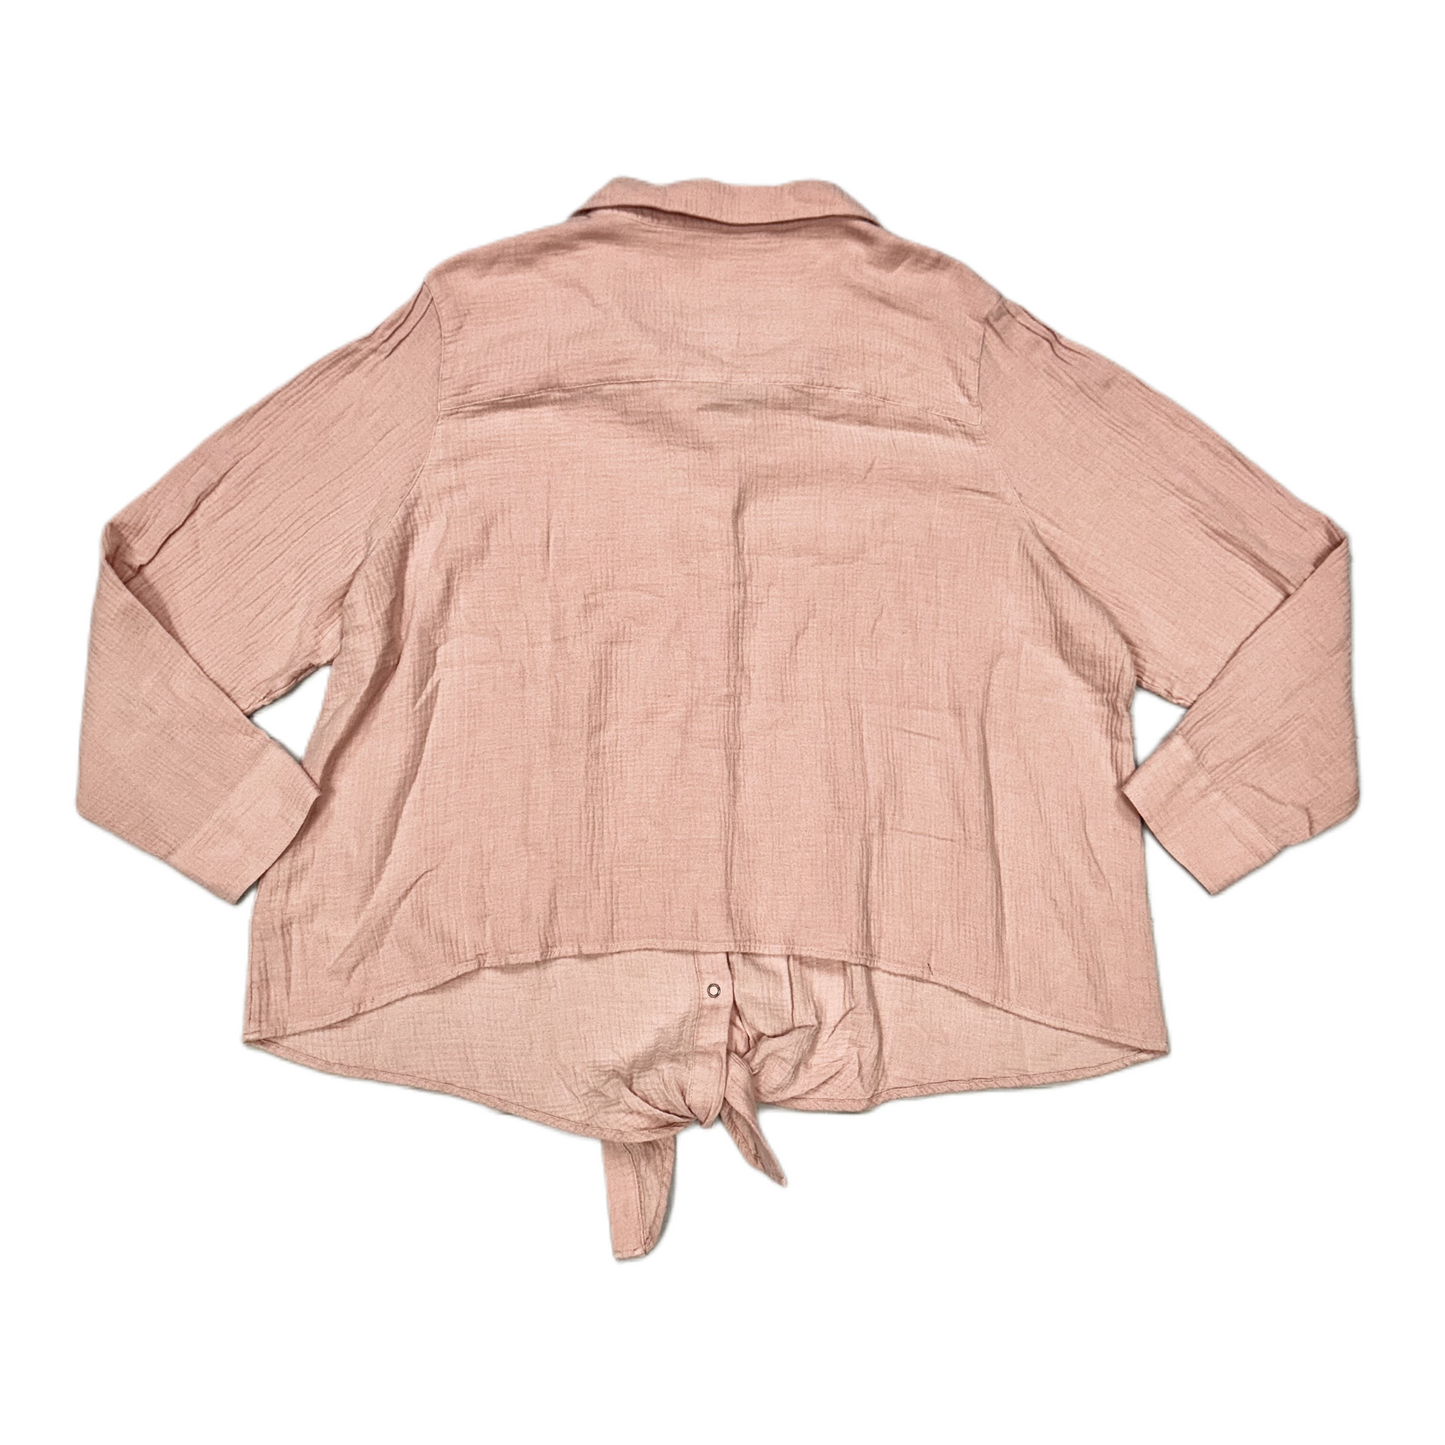 Pink Top Long Sleeve By Any Body, Size: 2x